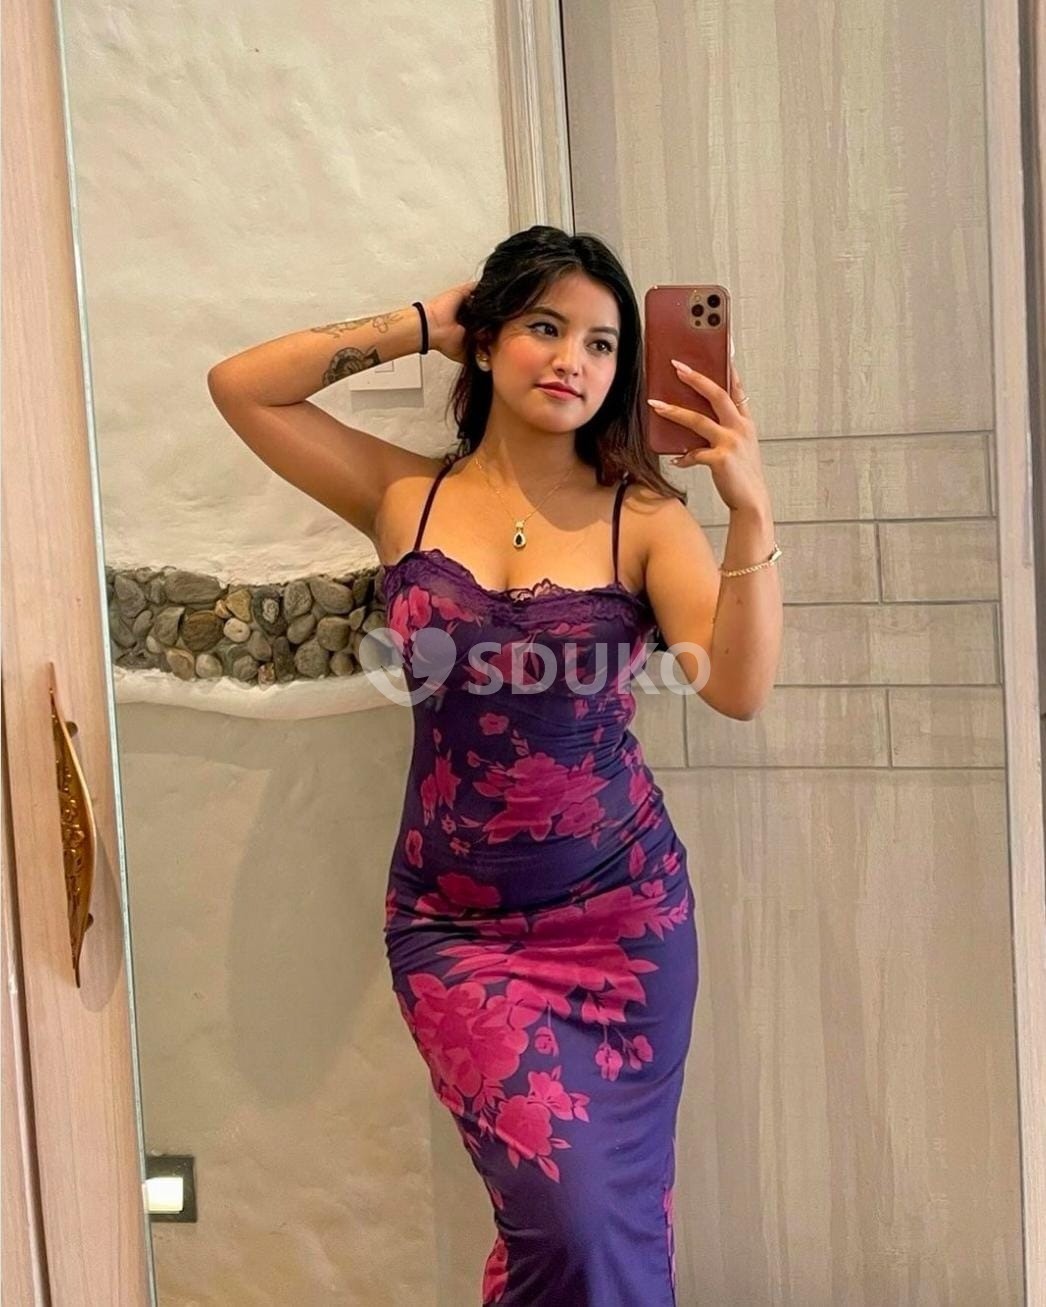 Shahadara 💯Myself Payal call girl service hotel and home service 24 hours available now call me